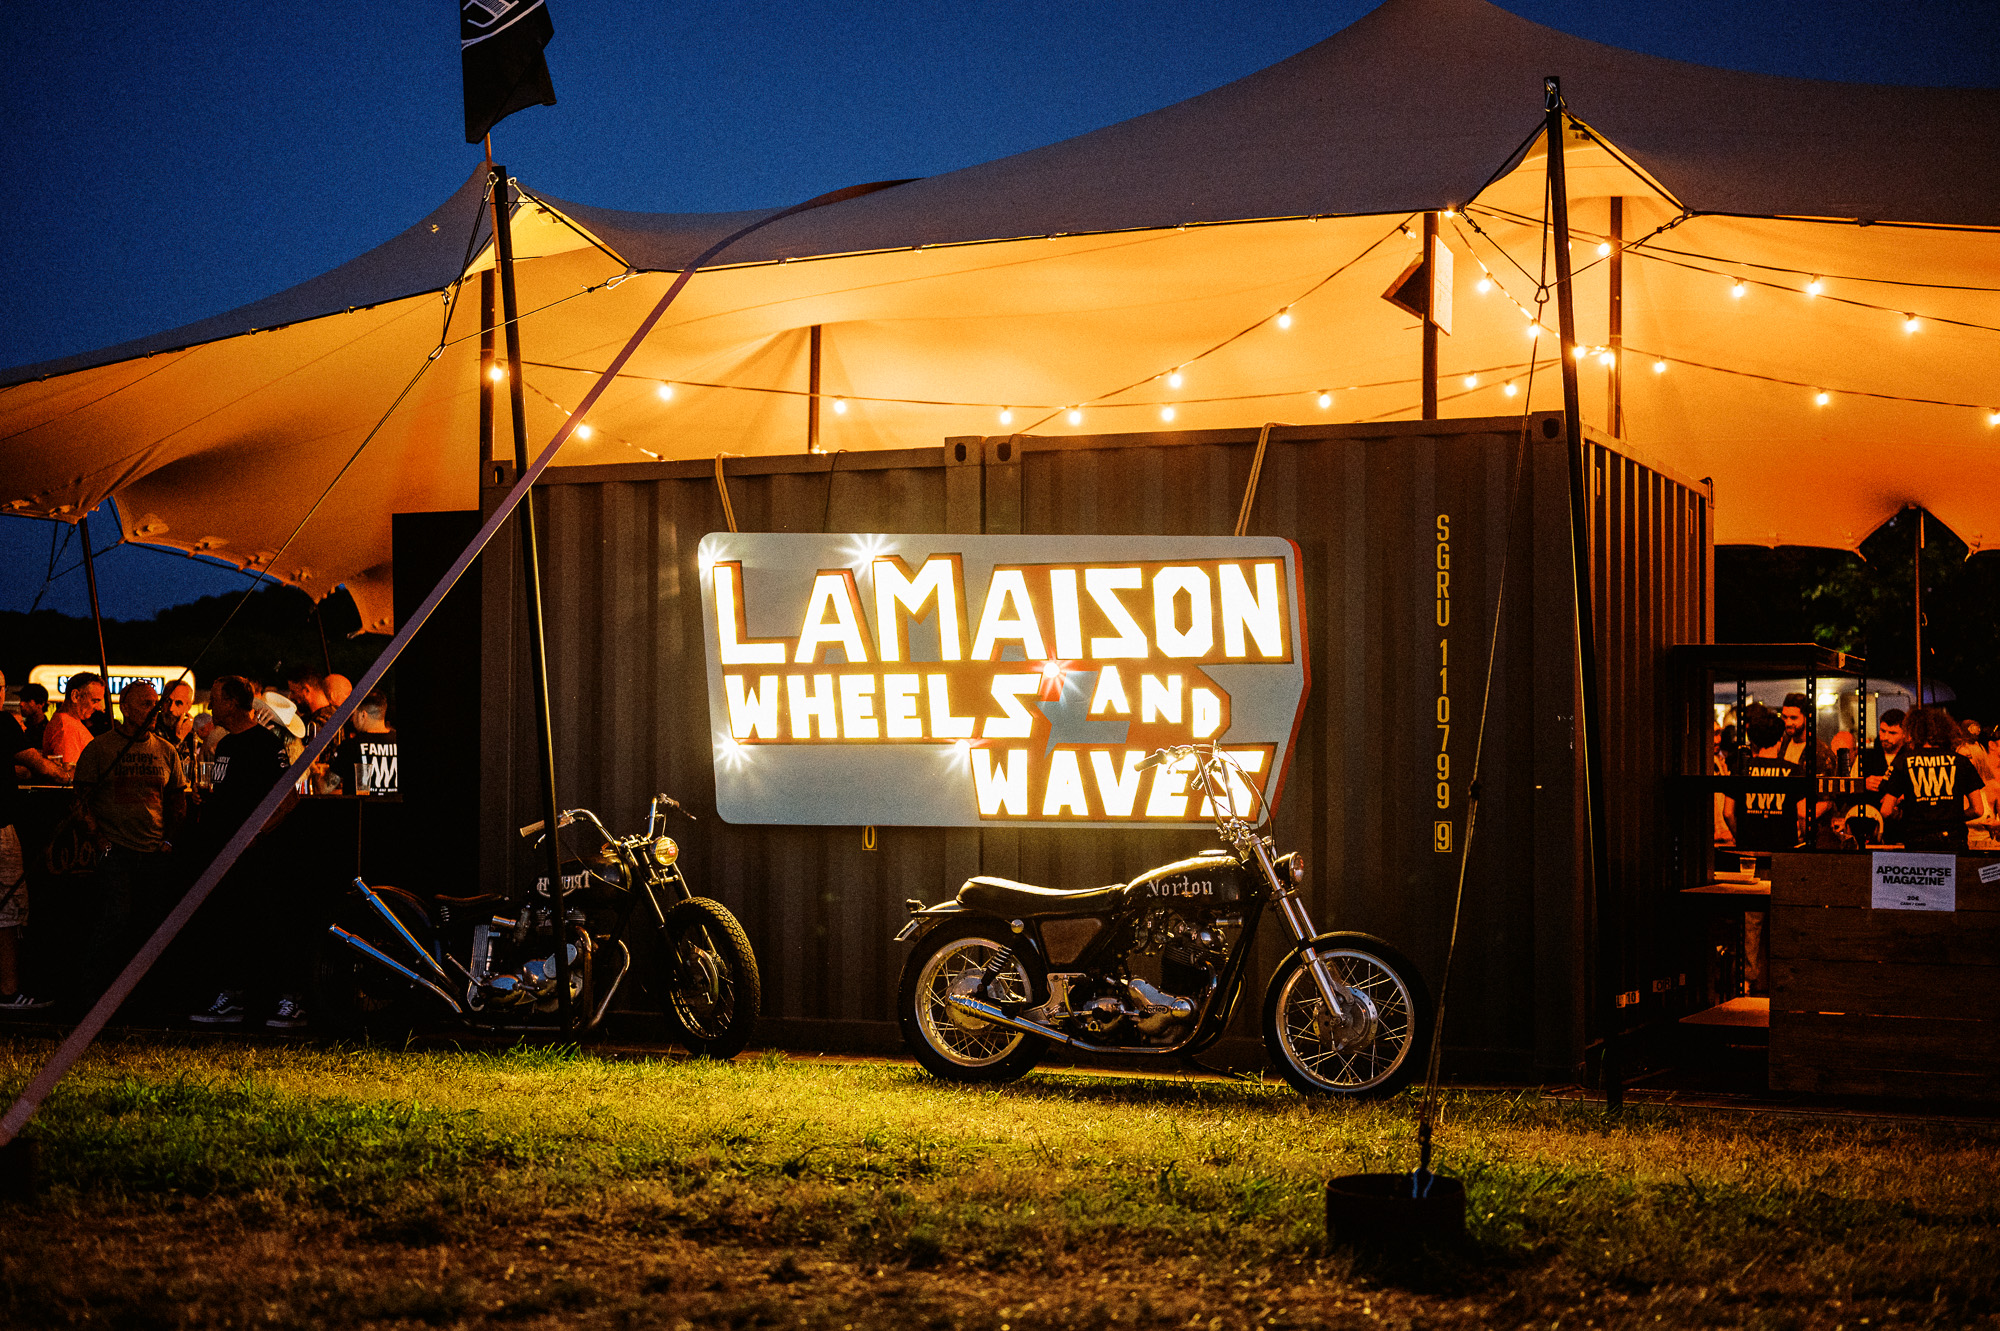 at tent and motorcycles at night at the Waves Bike Show in Biarritz, France